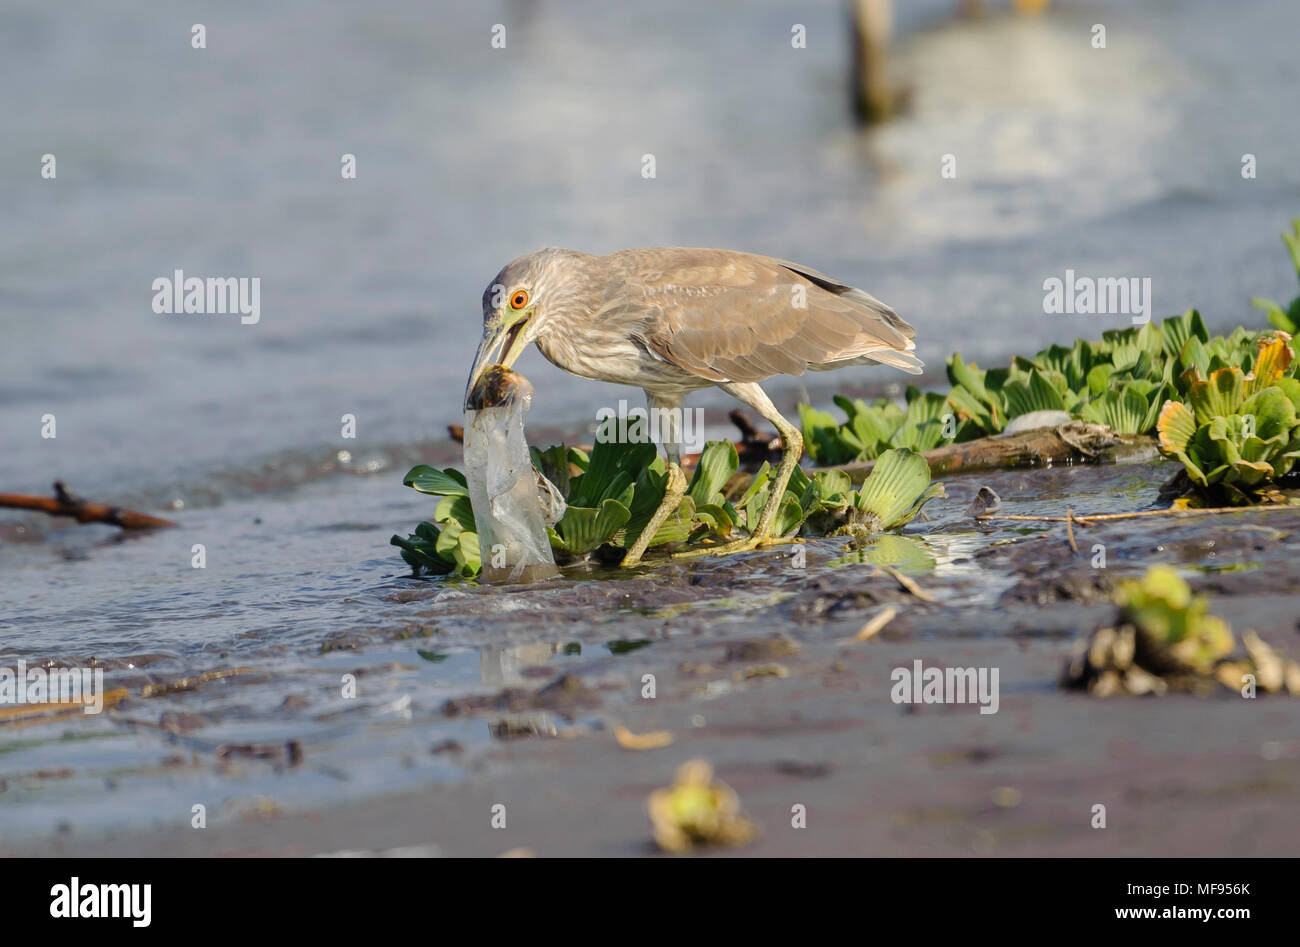 Jocotopec, Jalisco, Mexico, 24 April 2018. In the same week that the largest ever concentration of microplastics is found in the Atlantic Ocean other plastic waste continues to be a life threatening hazard for wildlife everywhere. Here an immature Black-crowned Night Heron (Nycticorax nycticorax) attempts to swallow a plastic bag carelessly discarded with fish inside, Lake Chapala. Consuming the bag is certain death. Most retailer stores and supermarkets in Mexico continue to use plastic bags at checkouts. Peter Llewellyn/Alamy News Stock Photo